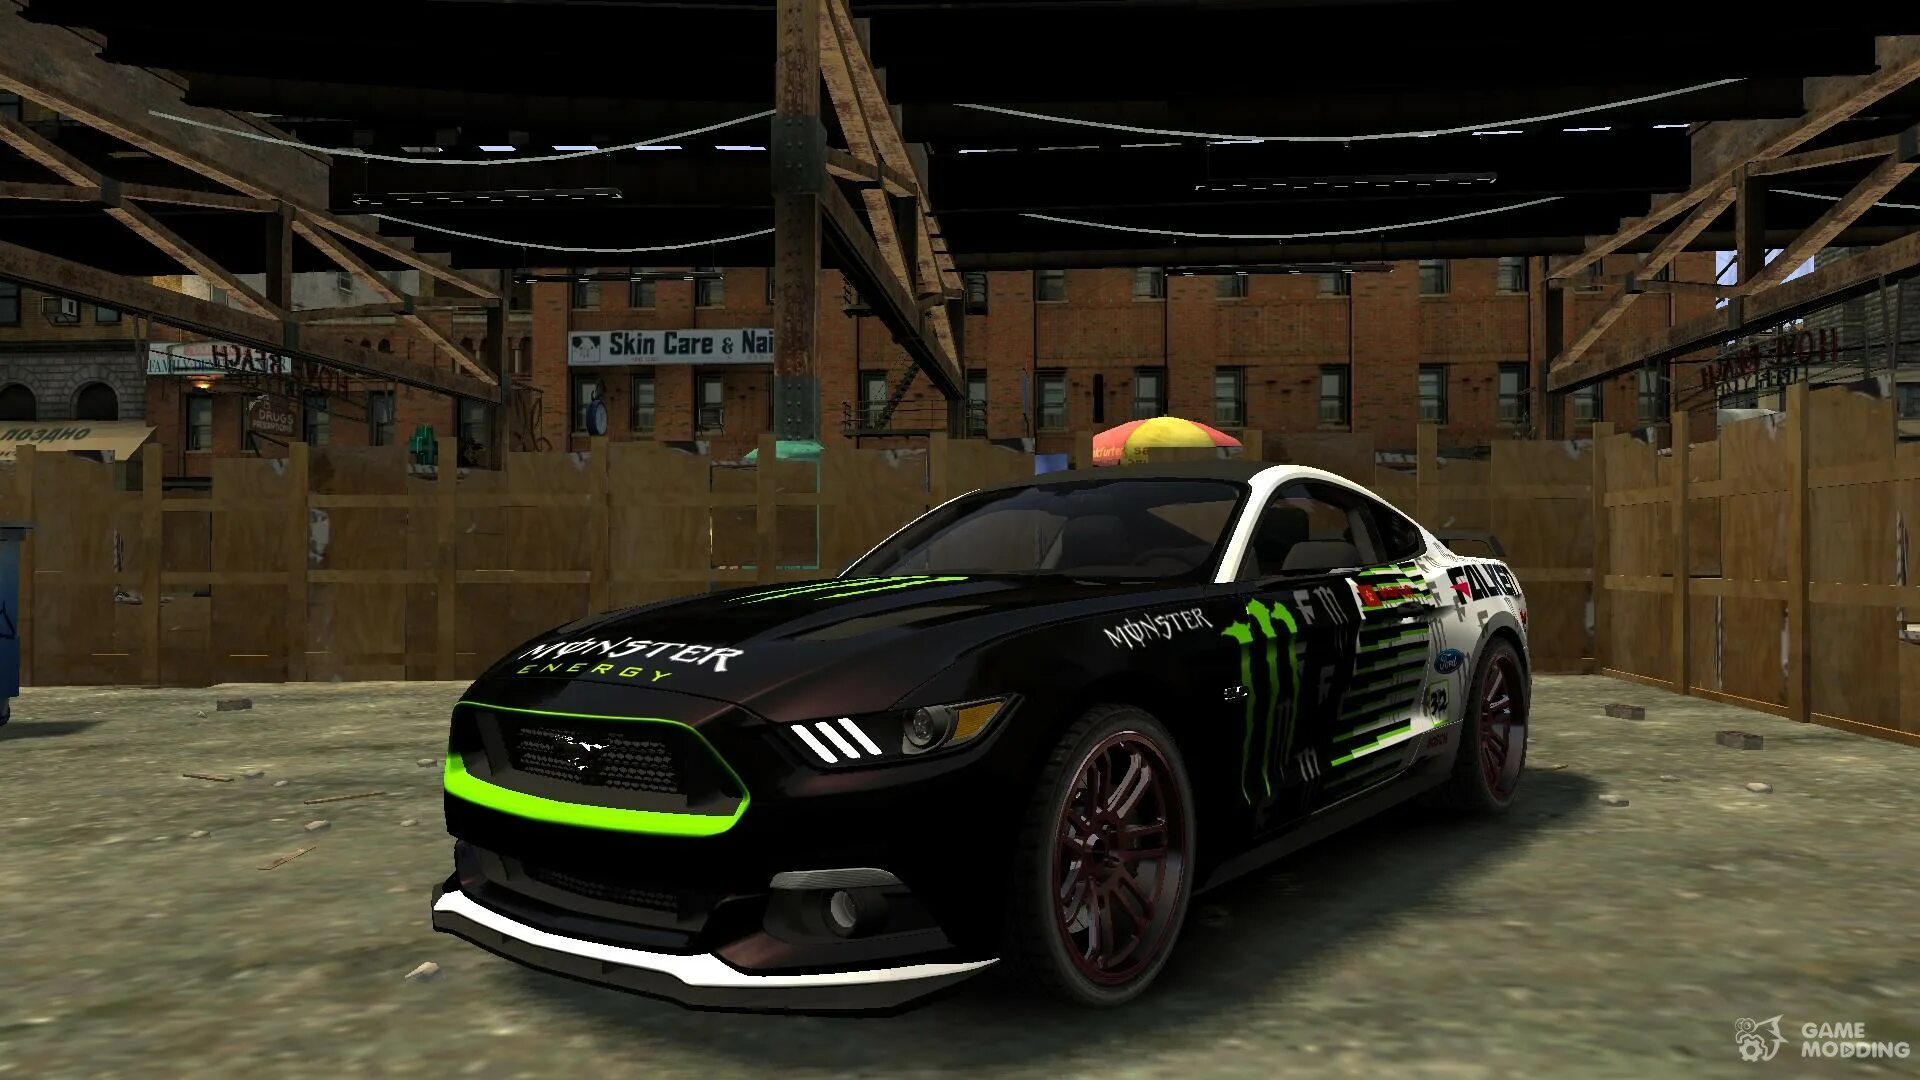 Ford Mustang Monster Energy 2015. Ford Mustang gt Monster Energy. Ford Mustang Monster Energy в Мэдаут 2. Винилы на Мустанг в мадаут. Madout 2 машины машина игра